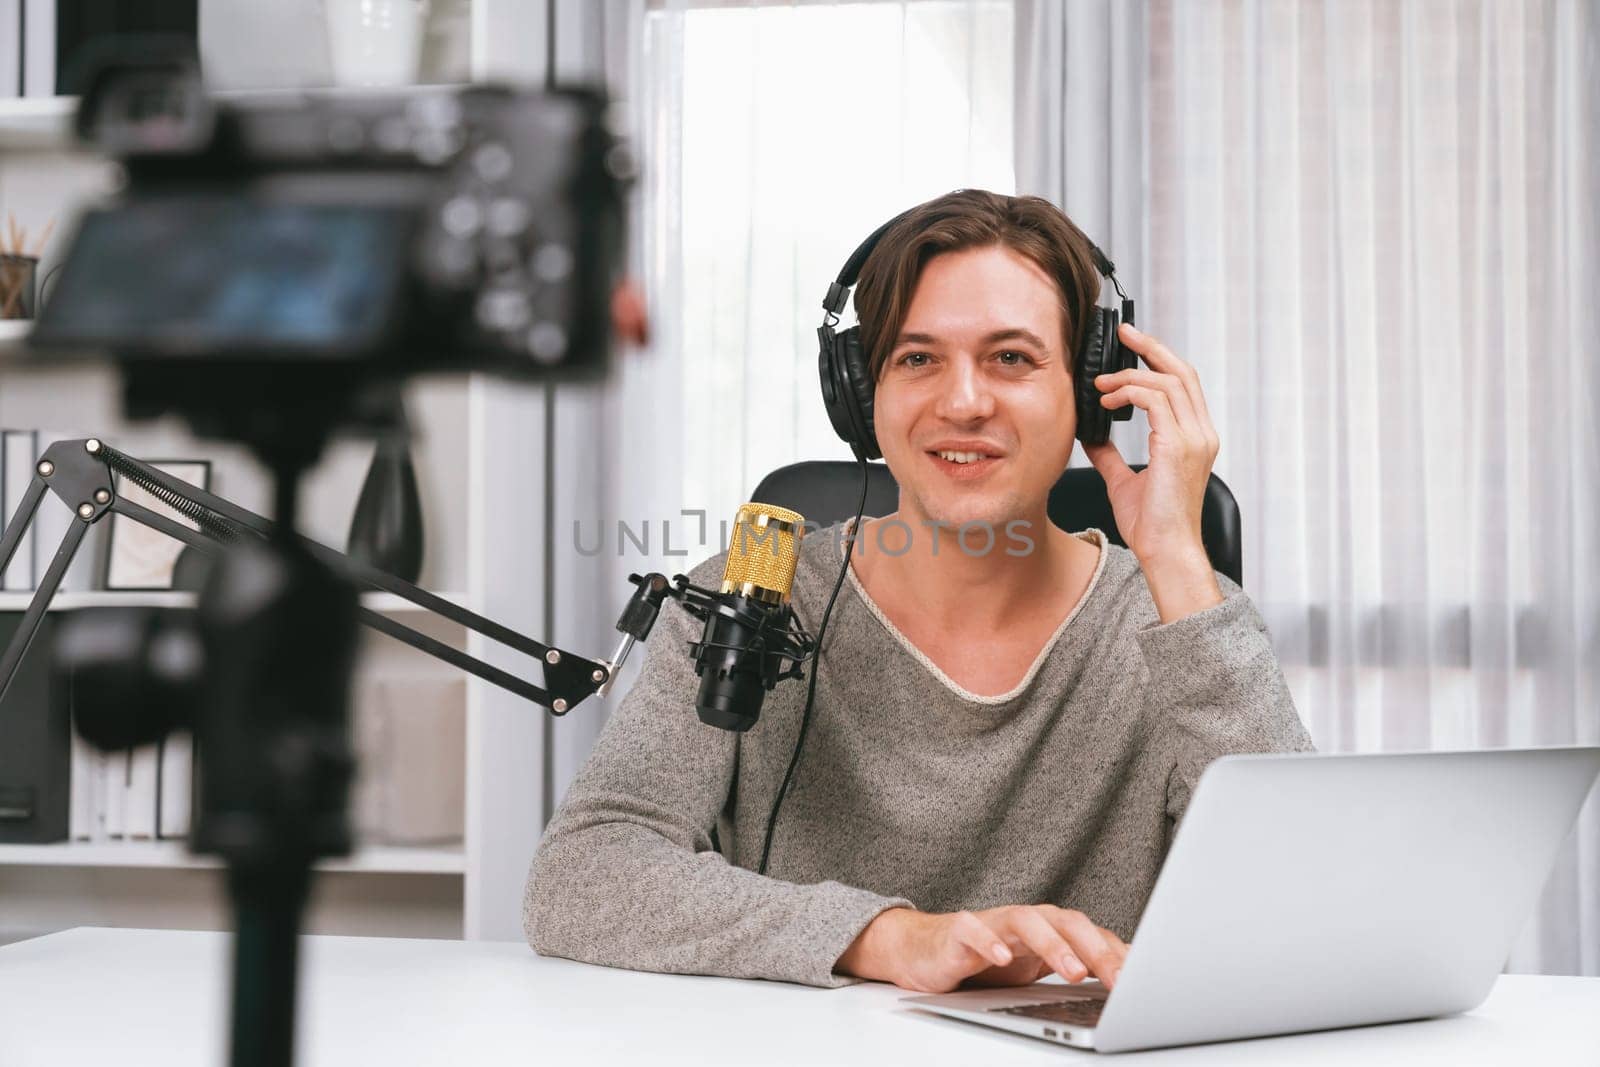 Host channel in smart broadcaster recording by camera with talking show on live social media, broadcasting on social media, wearing headphones to record video streamer at modern studio. Pecuniary.